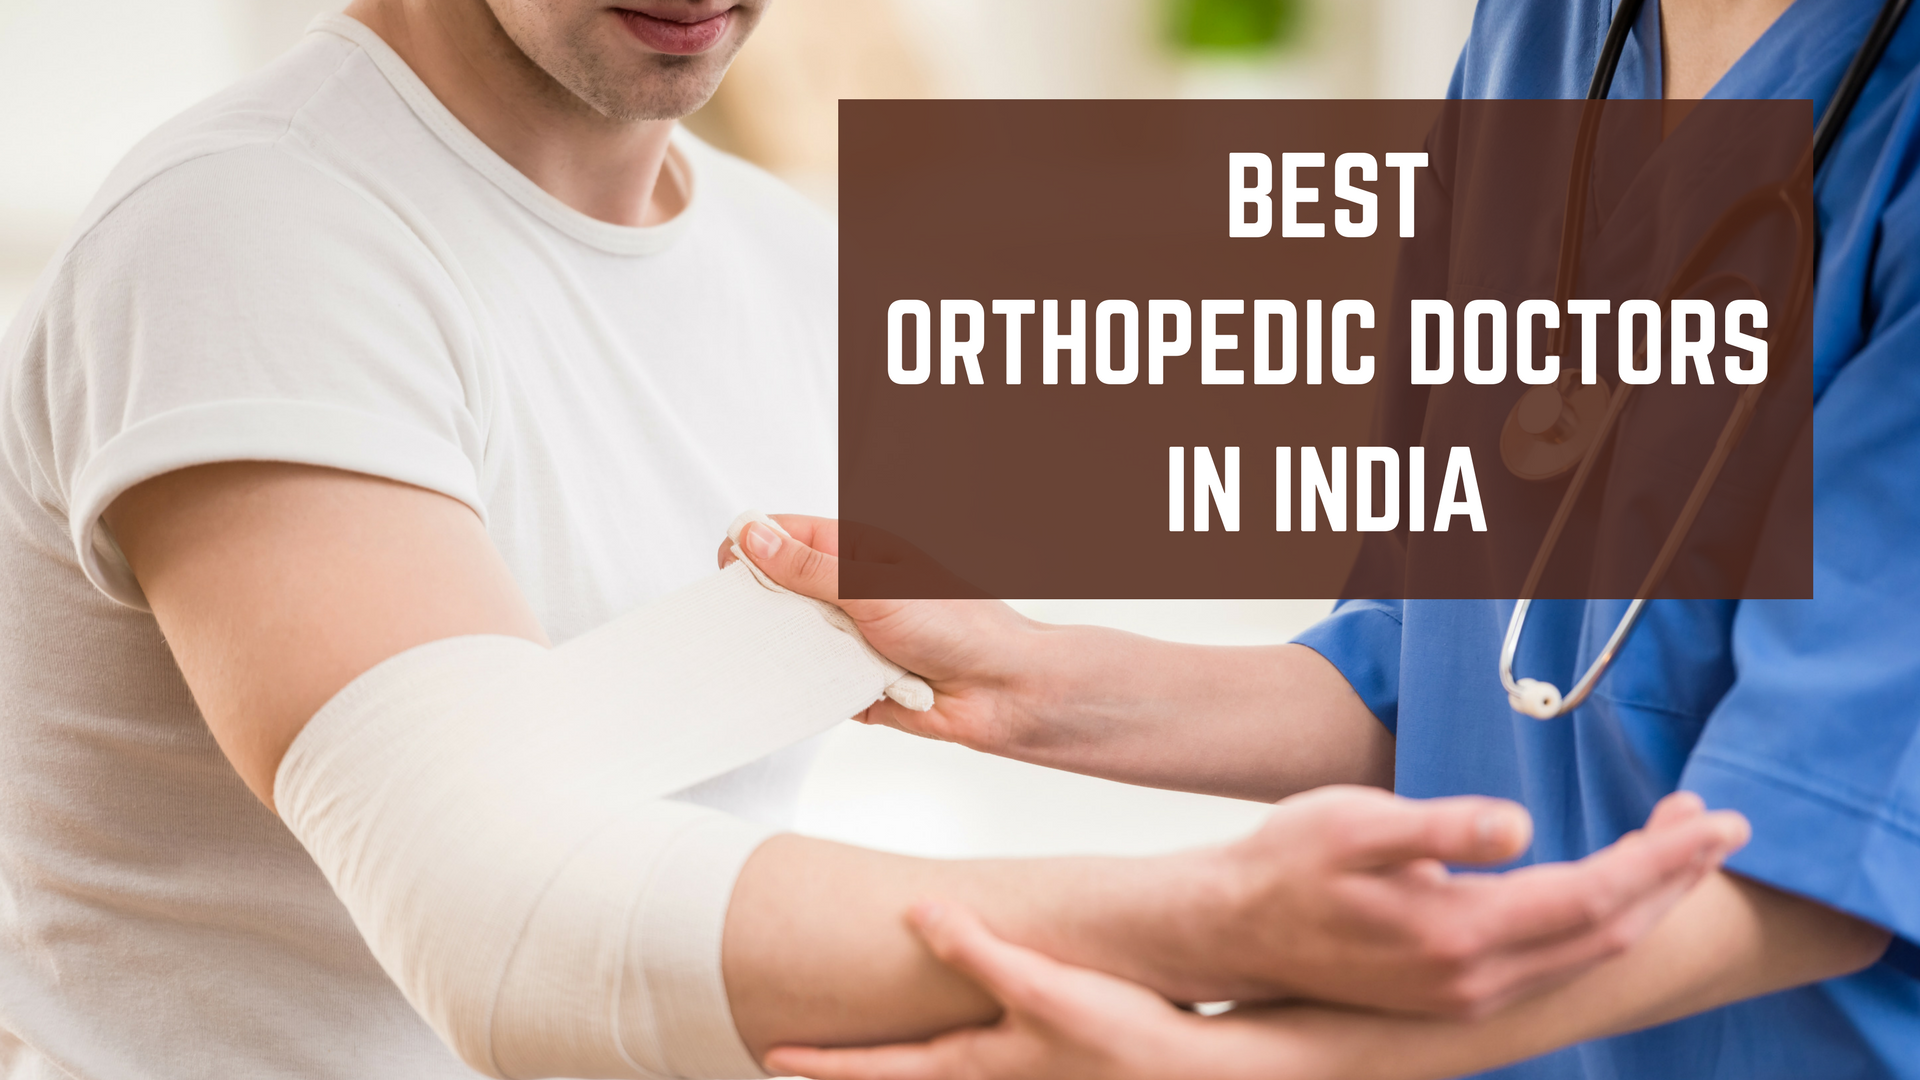 Who is India's No 1 ortho doctor?